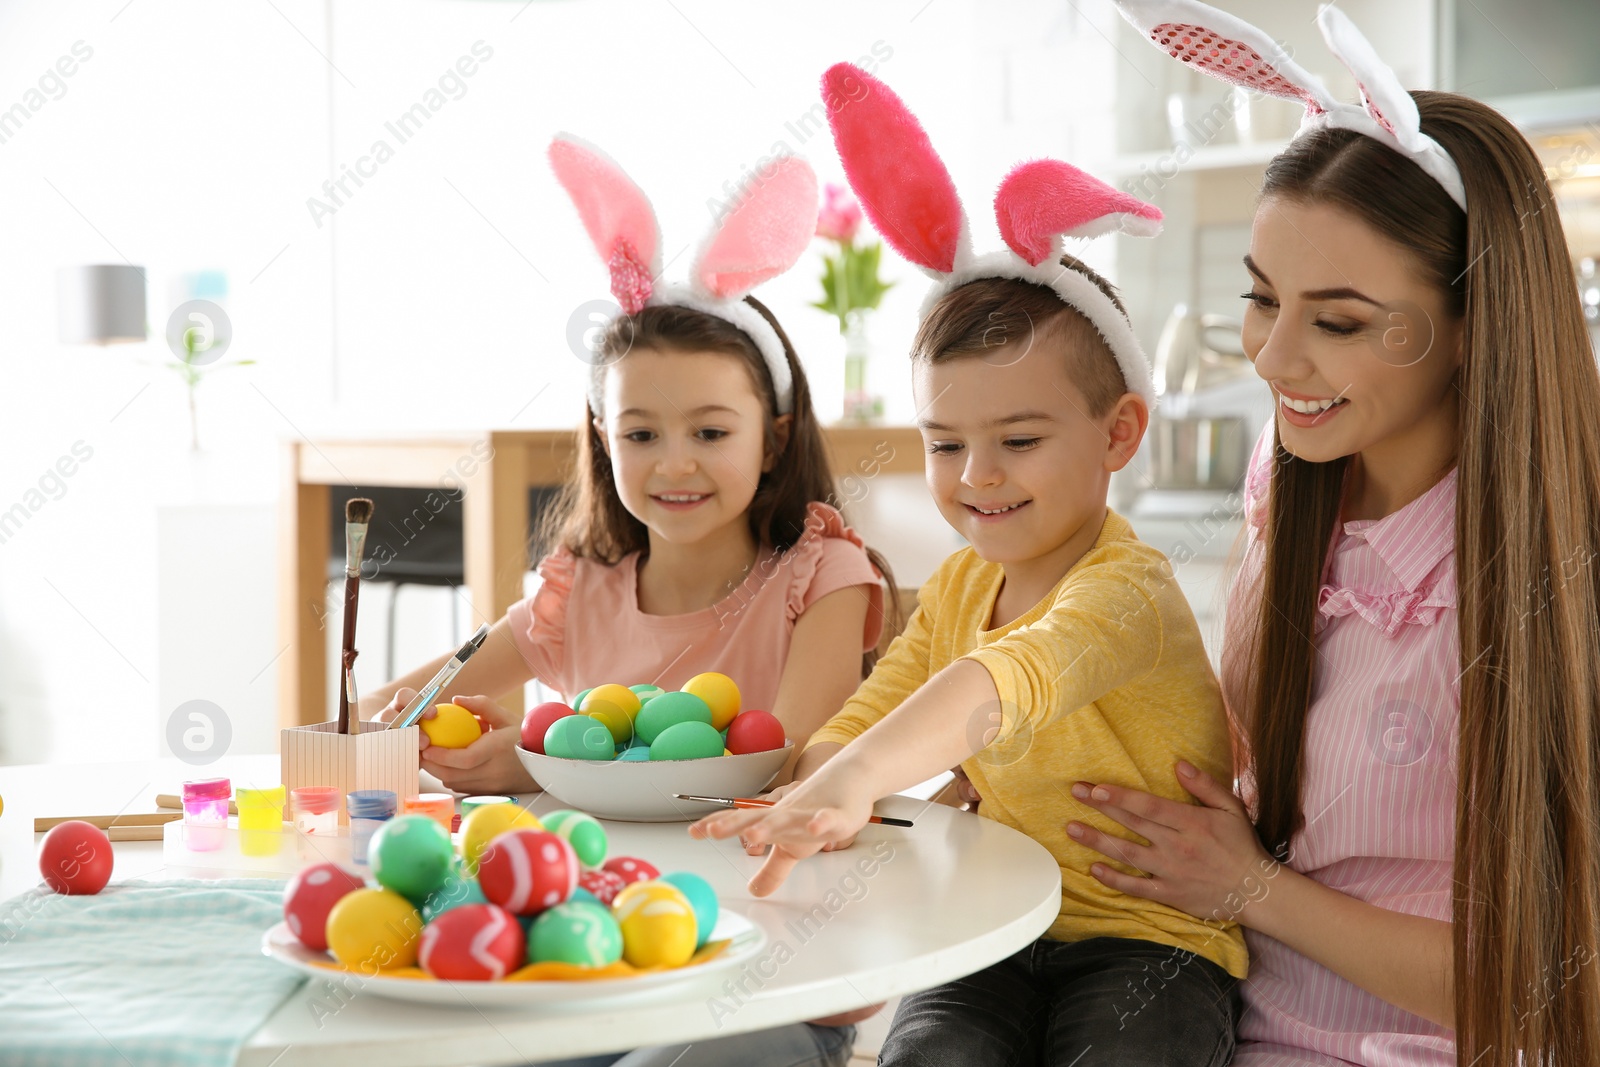 Photo of Mother and her children with bunny ears headbands painting Easter eggs in kitchen, space for text